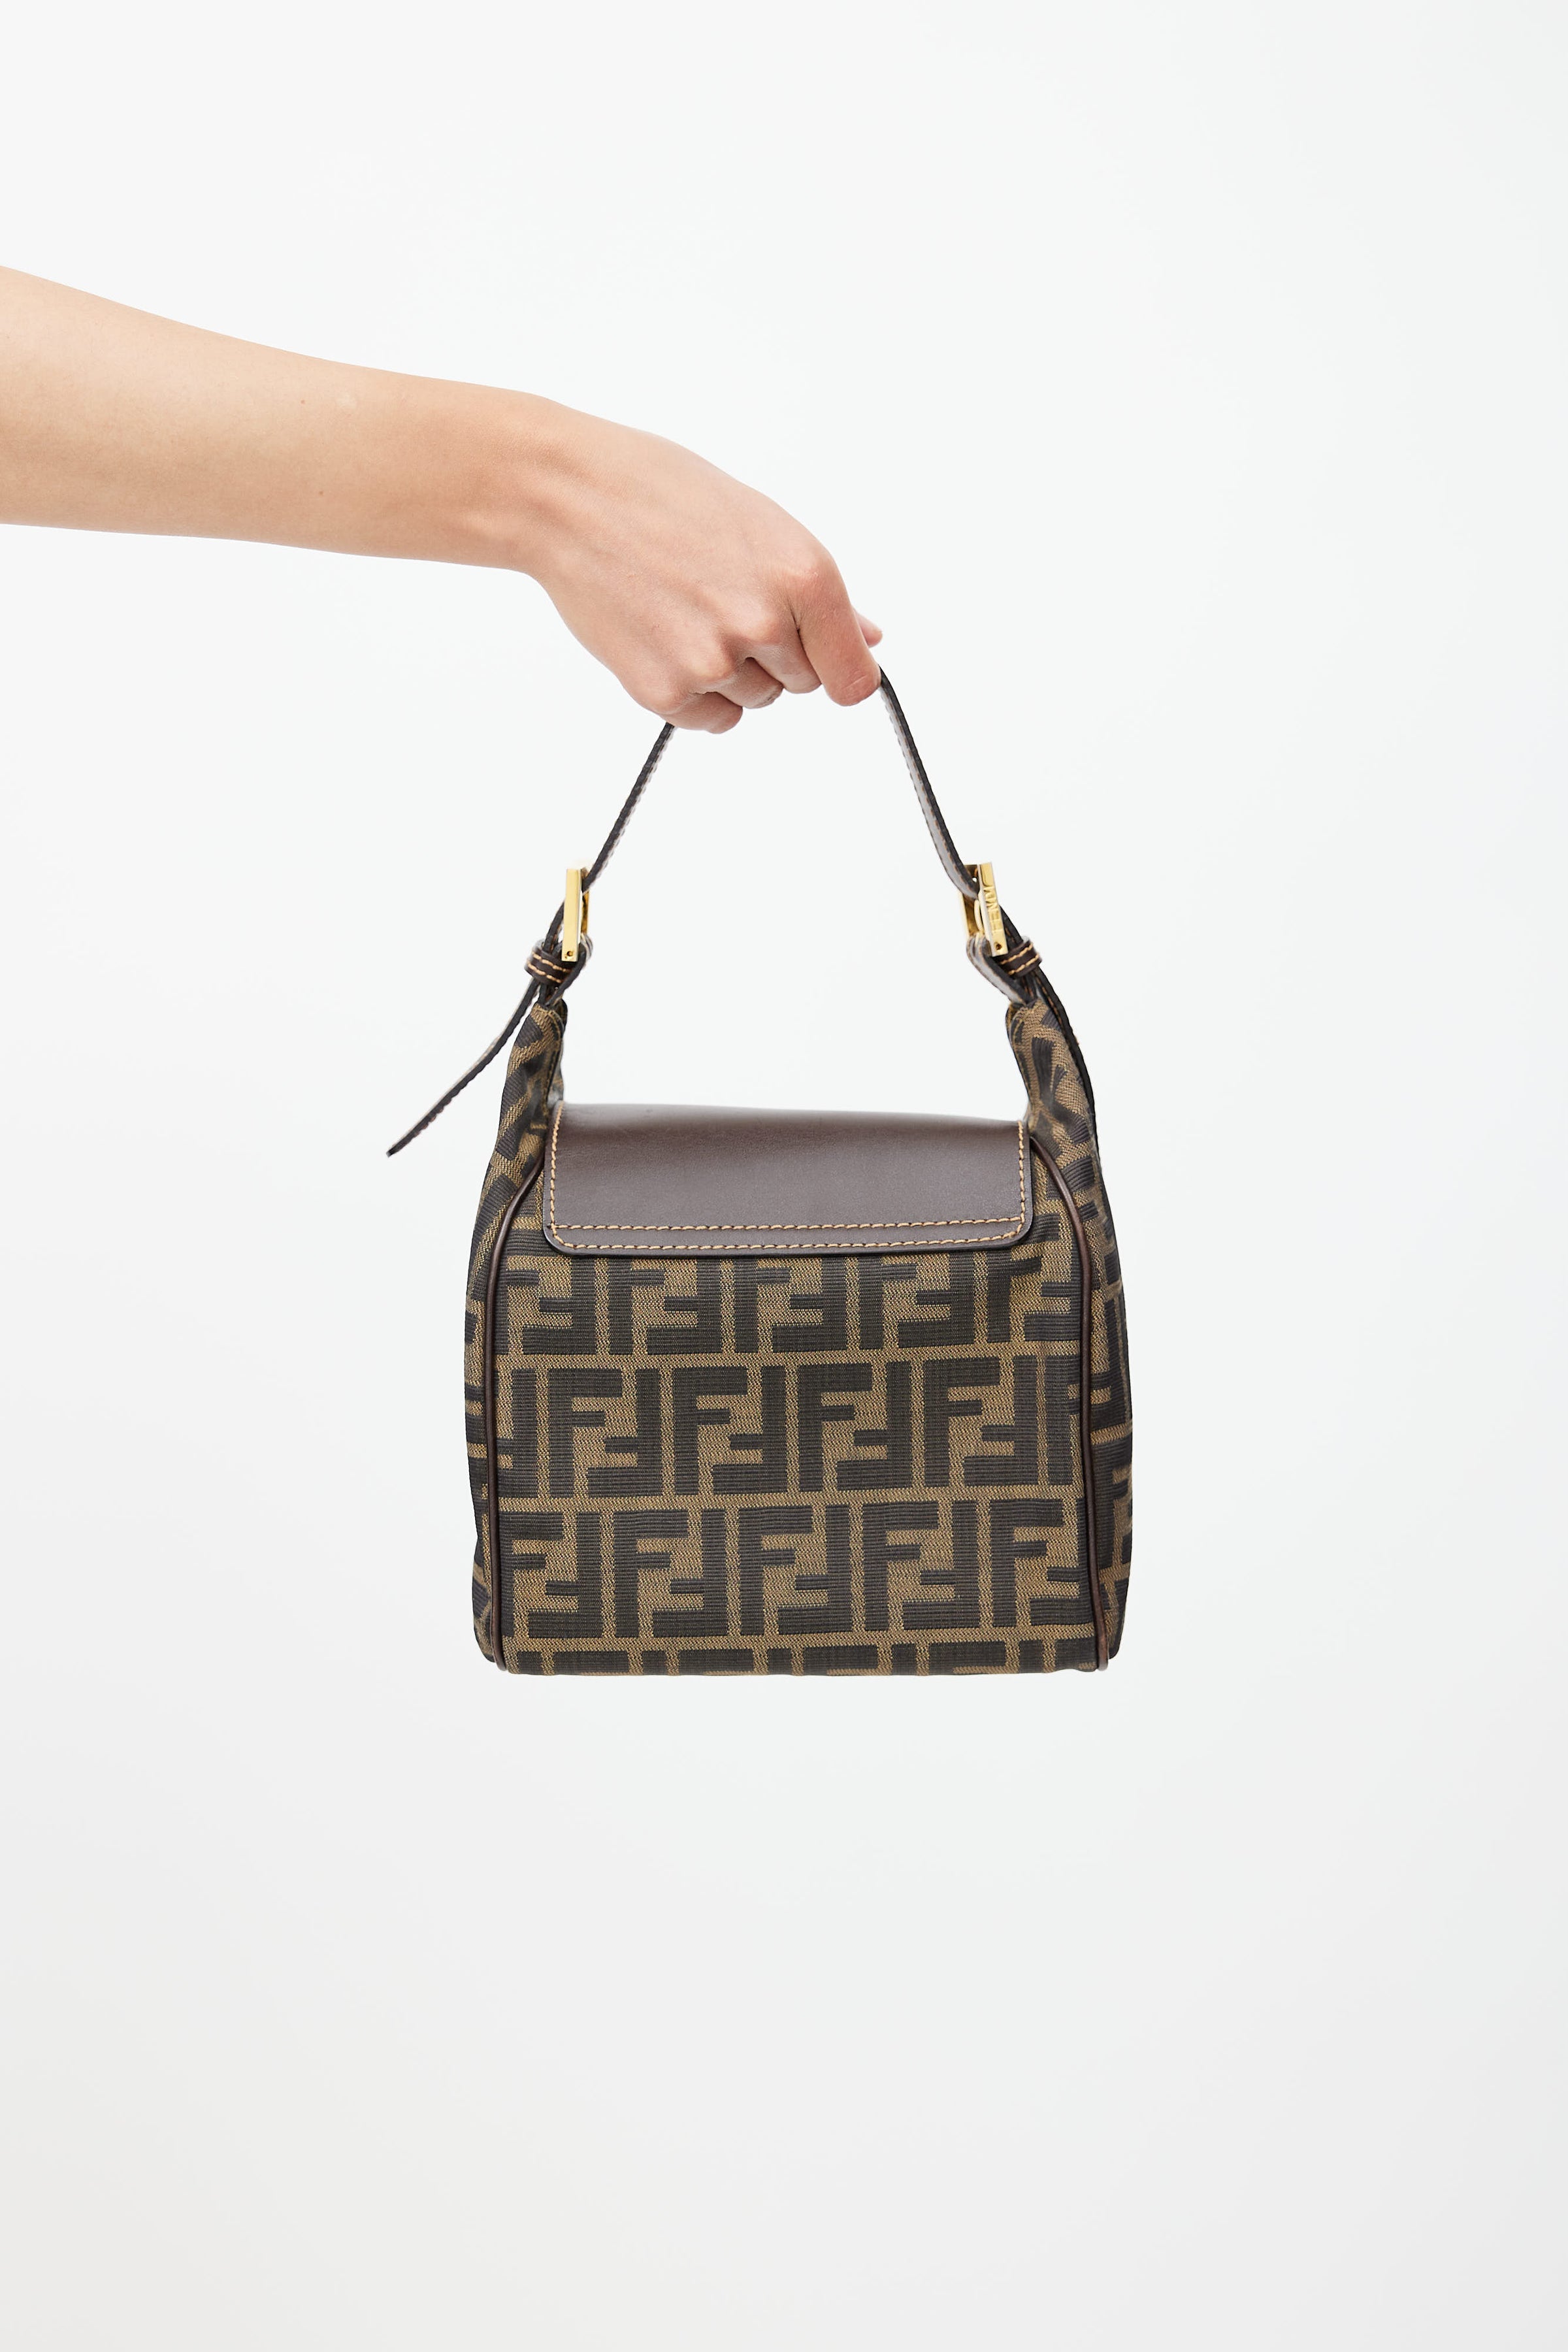 Fendi Pre-owned Women's Fabric Shoulder Bag - Brown - One Size